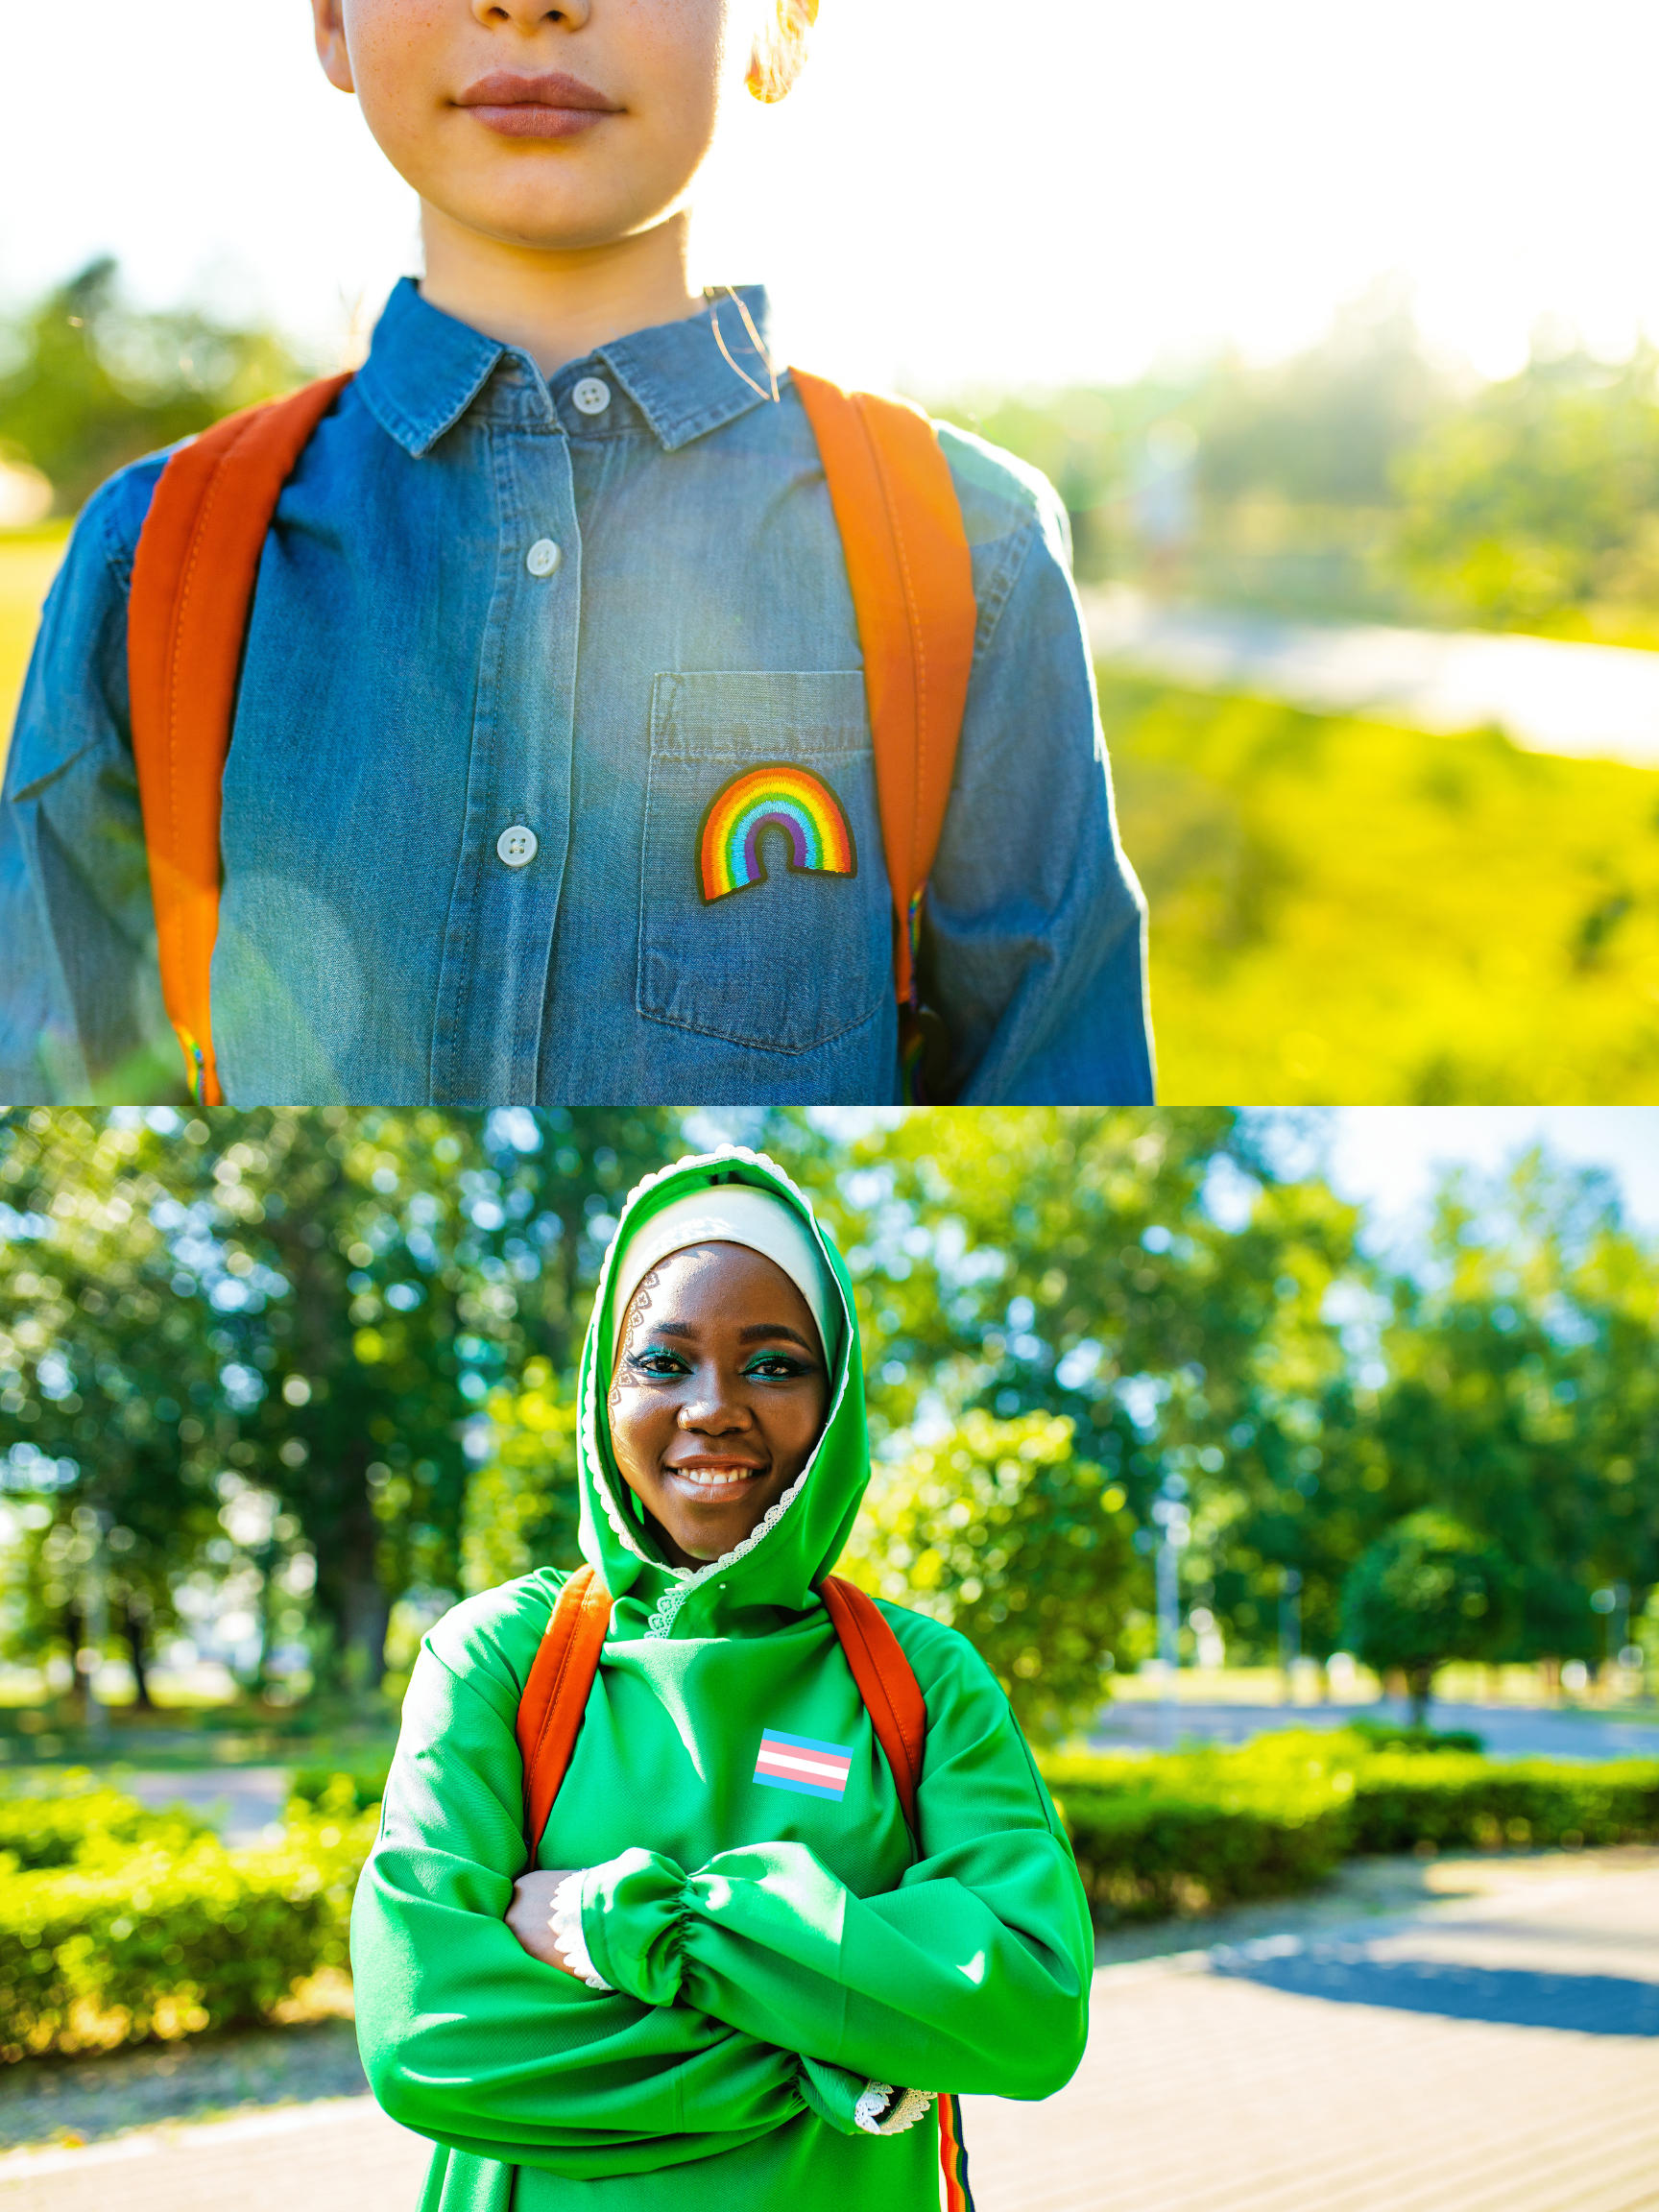 Two images, stacked vertically. The bottom image is of a Black student. The student has their arms crossed. They are wearing a green hoodie with the hood up. They have on a hijab and are wearing blue eyeshadow. They have an orange backpack on and are smiling at the camera. On their hoodie is a pin with the trans flag. The top image is an image of a student, shown from the nose down. They are wearing a blue denim button up shirt with a color. The shirt has an embroidered rainbow on it. They are wearing an orange backpack.